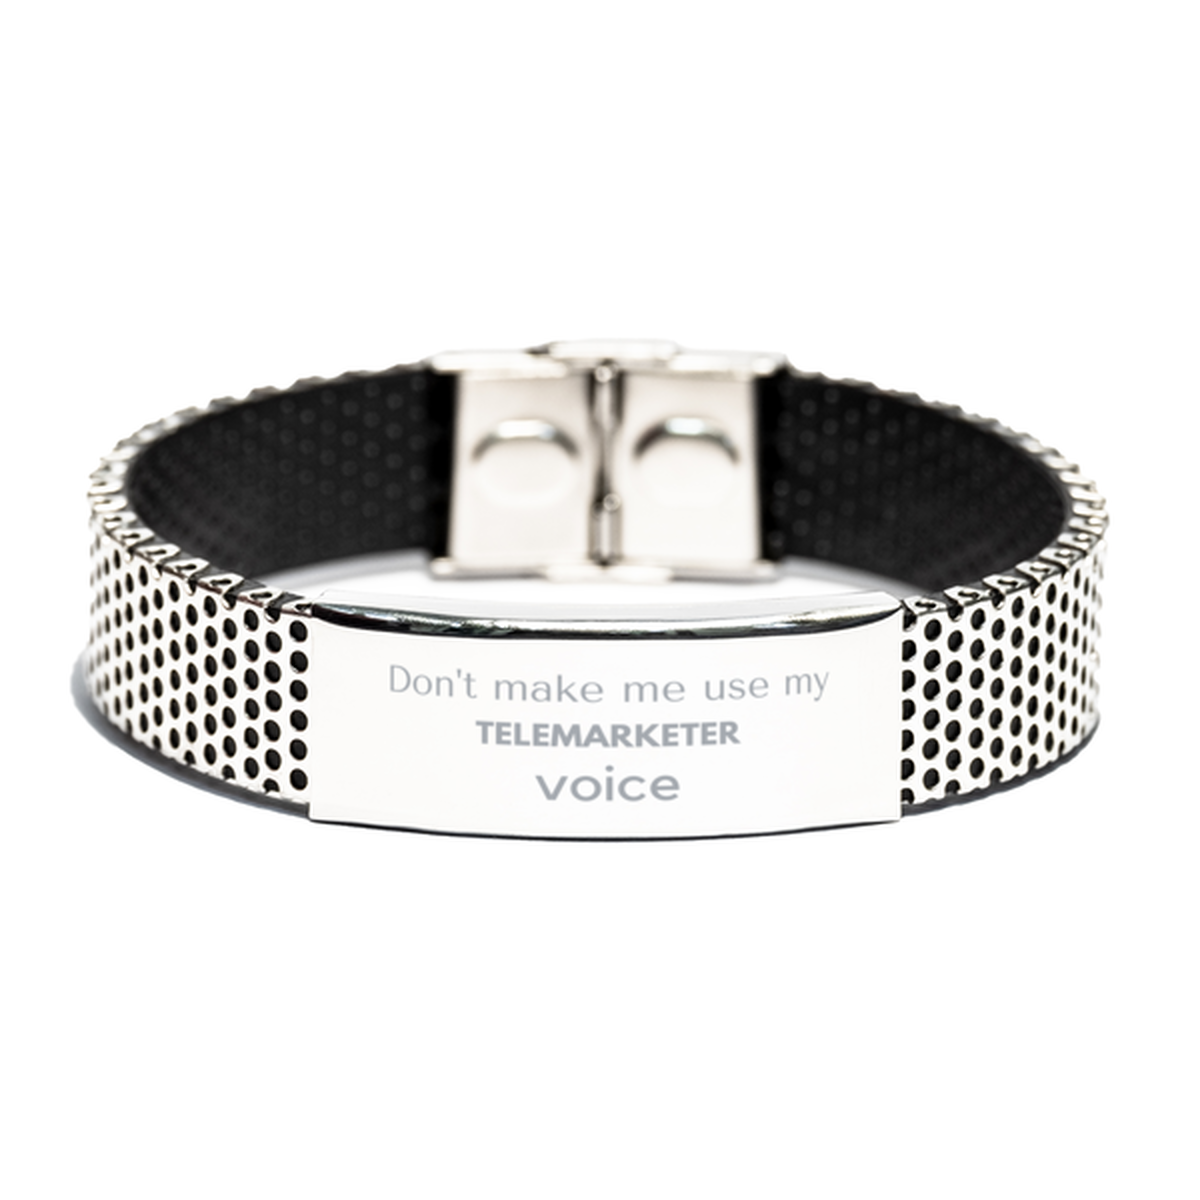 Don't make me use my Telemarketer voice, Sarcasm Telemarketer Gifts, Christmas Telemarketer Stainless Steel Bracelet Birthday Unique Gifts For Telemarketer Coworkers, Men, Women, Colleague, Friends